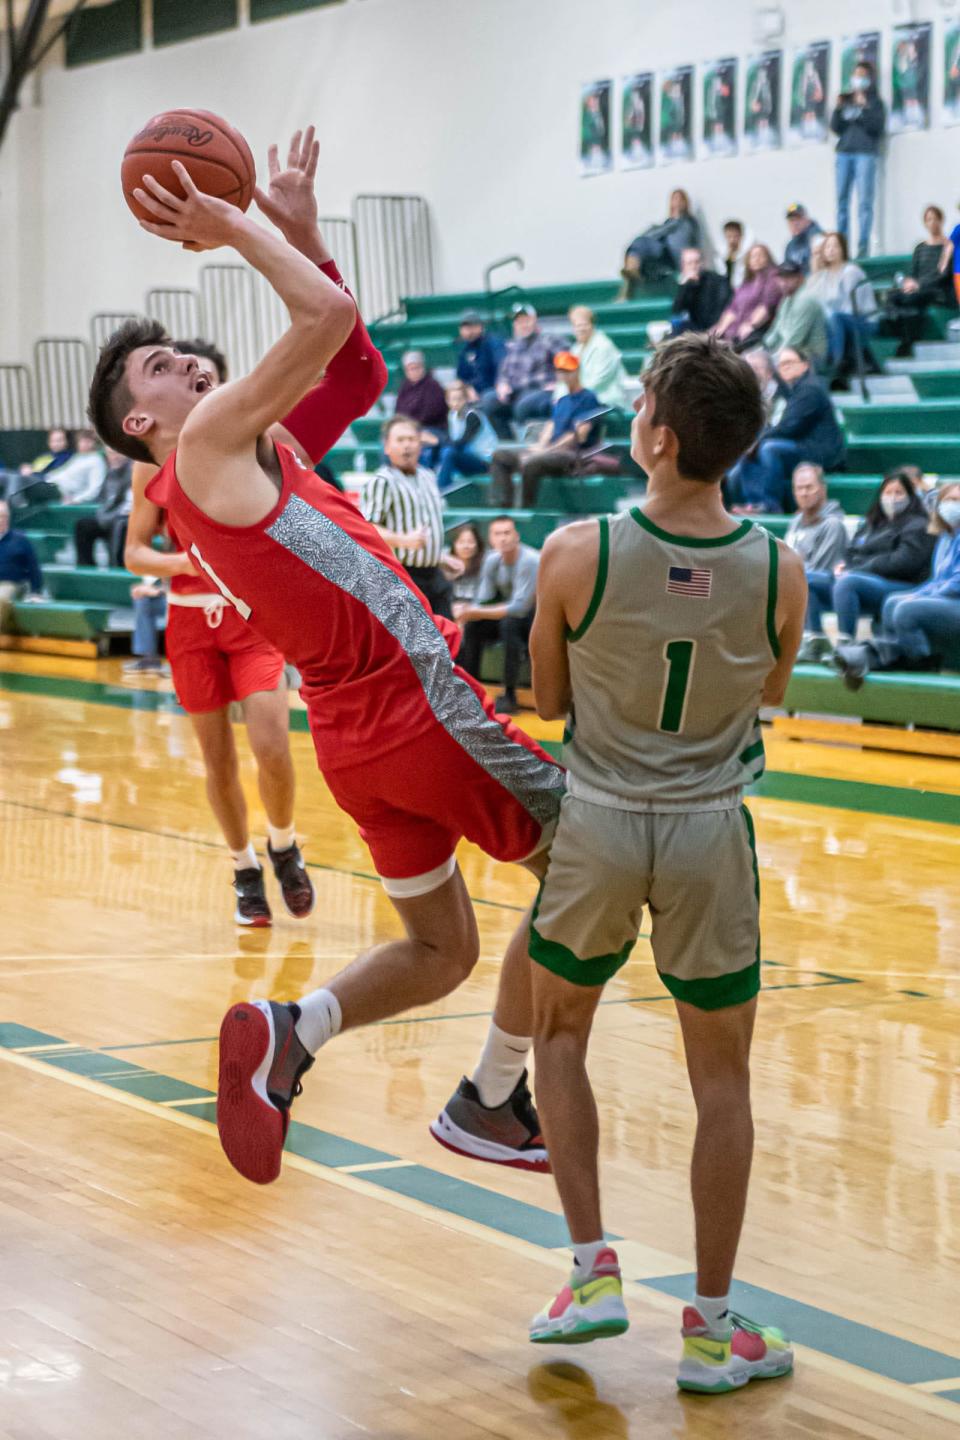 Coldwater's Ethan Crabtree takes an off-balanced shot over Pennfield's Luke Davis during first half action at Pennfield High School on January 18, 2022.